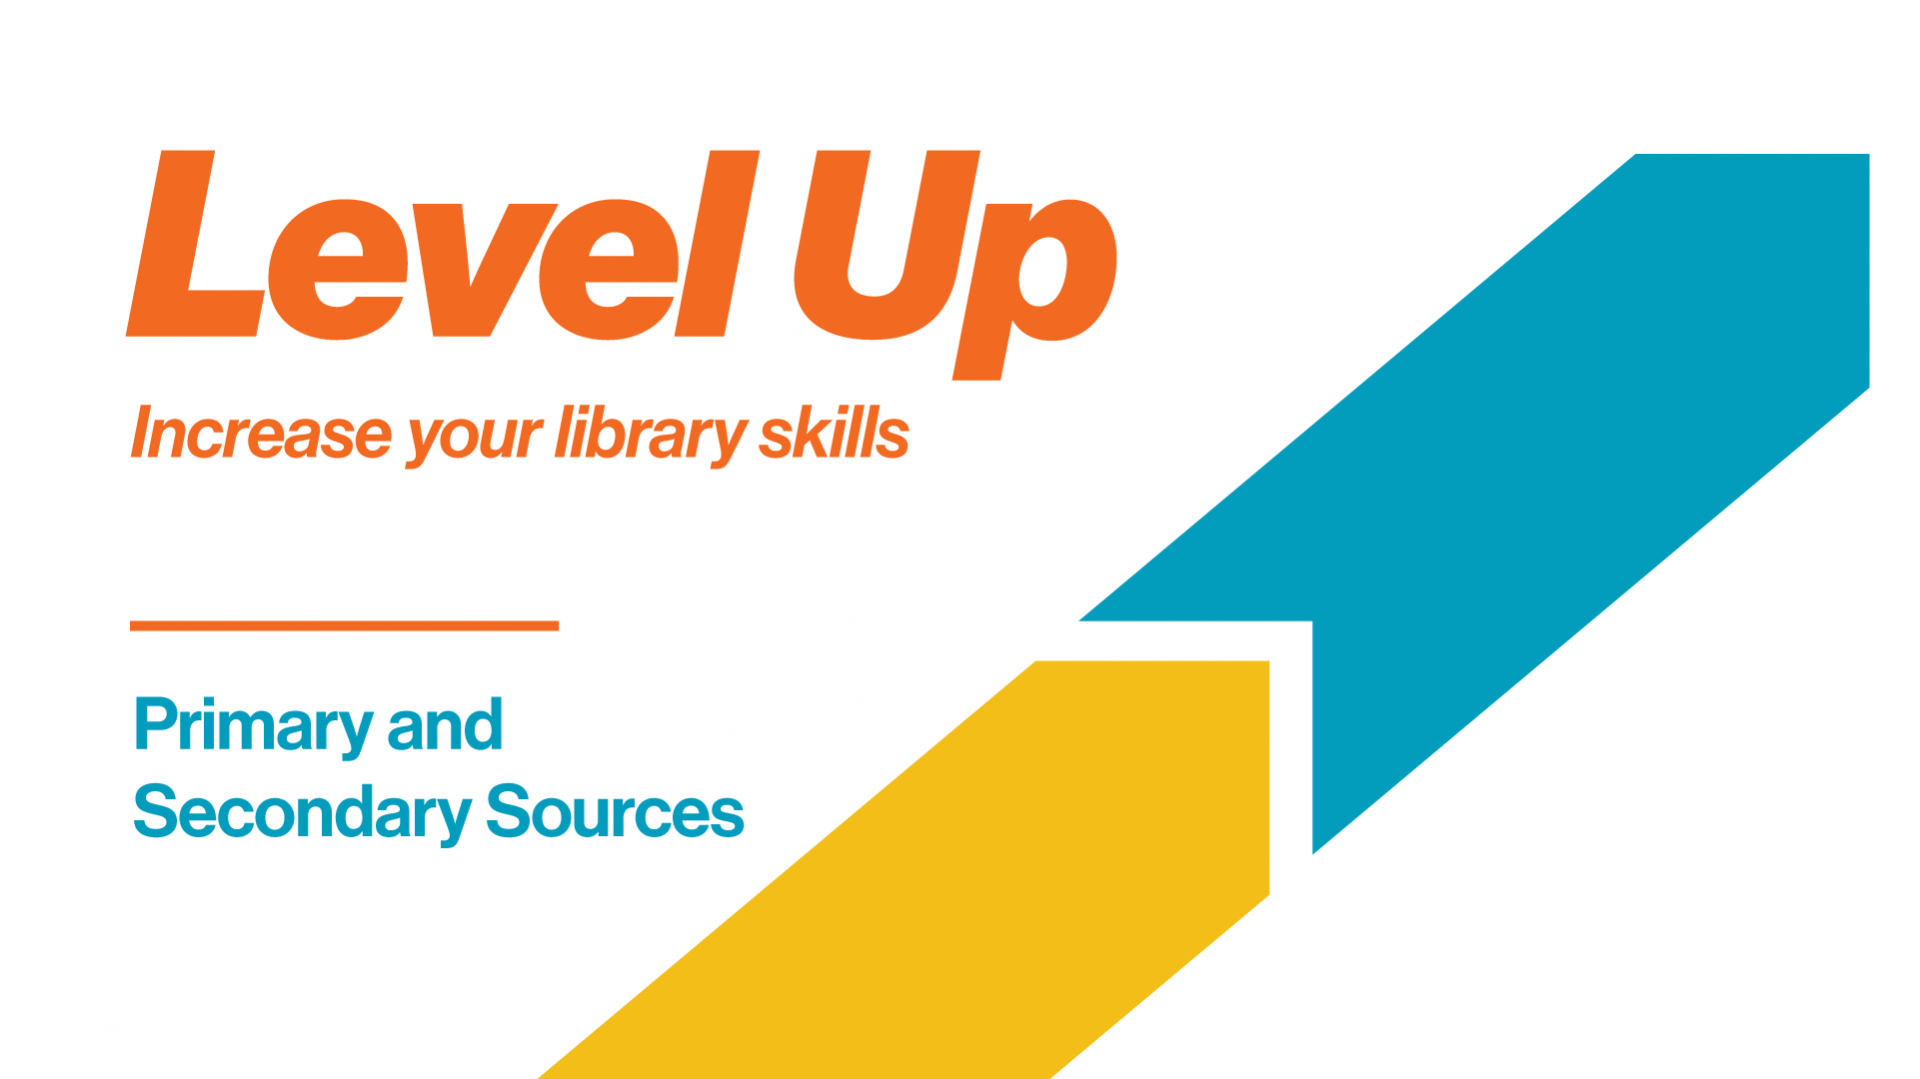 Level Up: Increase your library skills. Primary and secondary sources